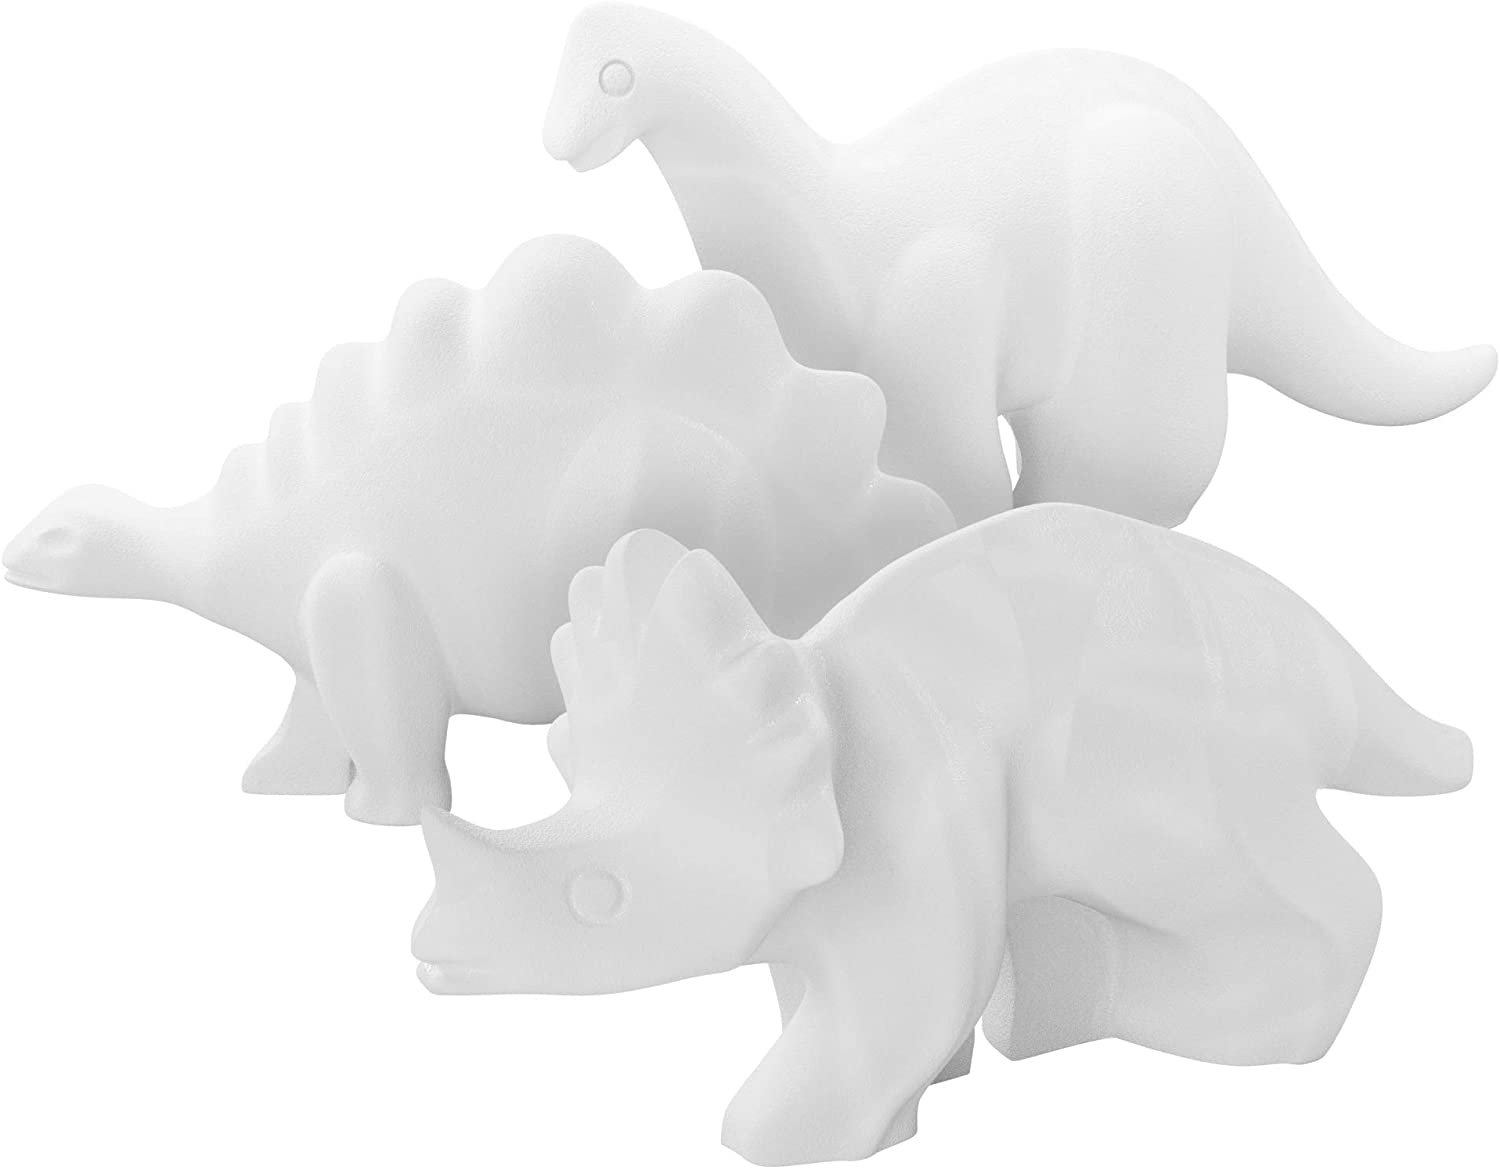 Paint 3 Large Dino Squishies - Paint a Squishy Kit - Make Your Own Squishies with Puffy Paint - Arts and Crafts Gifts for Kids, Boys & Girls - DIY Squishy Makeovers Painting Kit, Dinosaur Toys - image 5 of 8